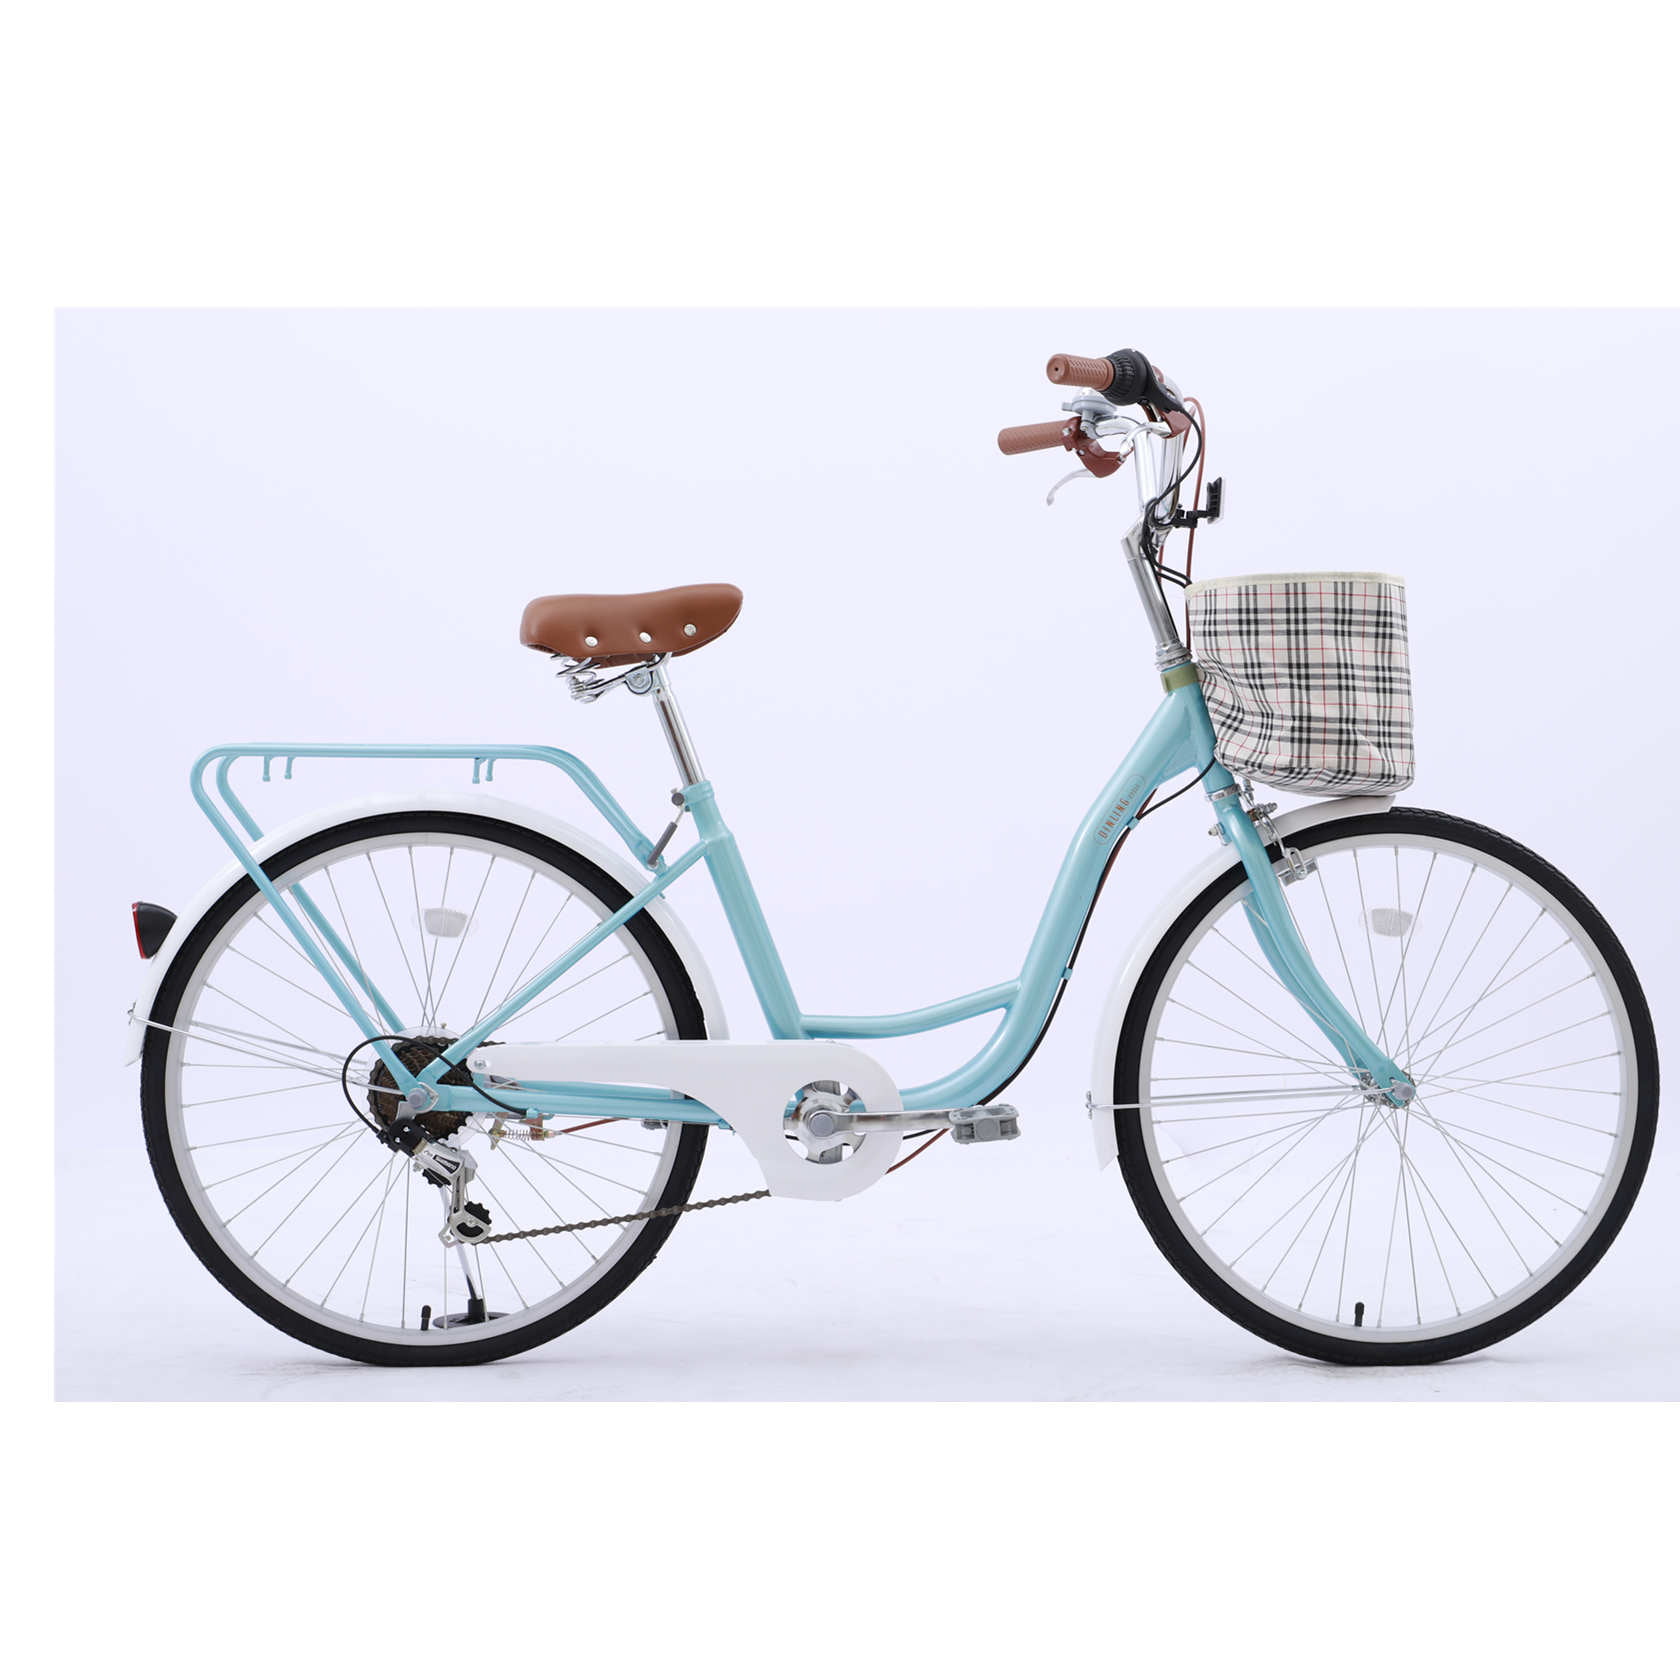 Ship from USA 26 Inch Cruiser Bike Retro Bicycle Beach Cruiser Bicycle Classic Bicycle Shopping Bikes Comfortable Commuter Bicycle 7/Single Speed Bikes with Front Basket Rear Racks for Men Women 